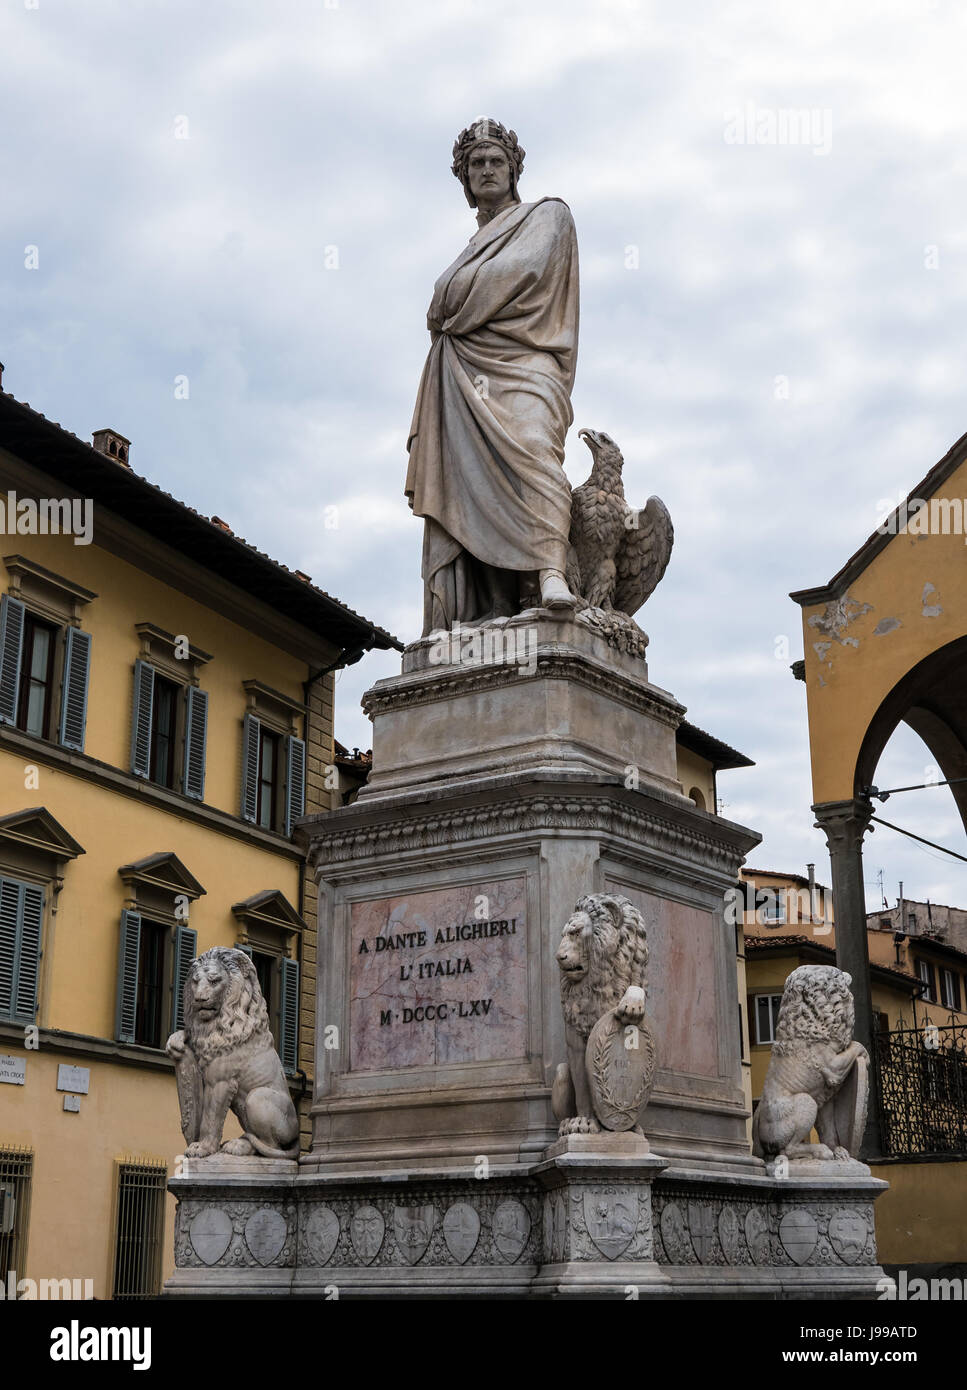 Florence, Italy - 18 April 2017 - Statue of Dante Alighieri on Piazza Santa Croce, in Florence, Italy. Stock Photo